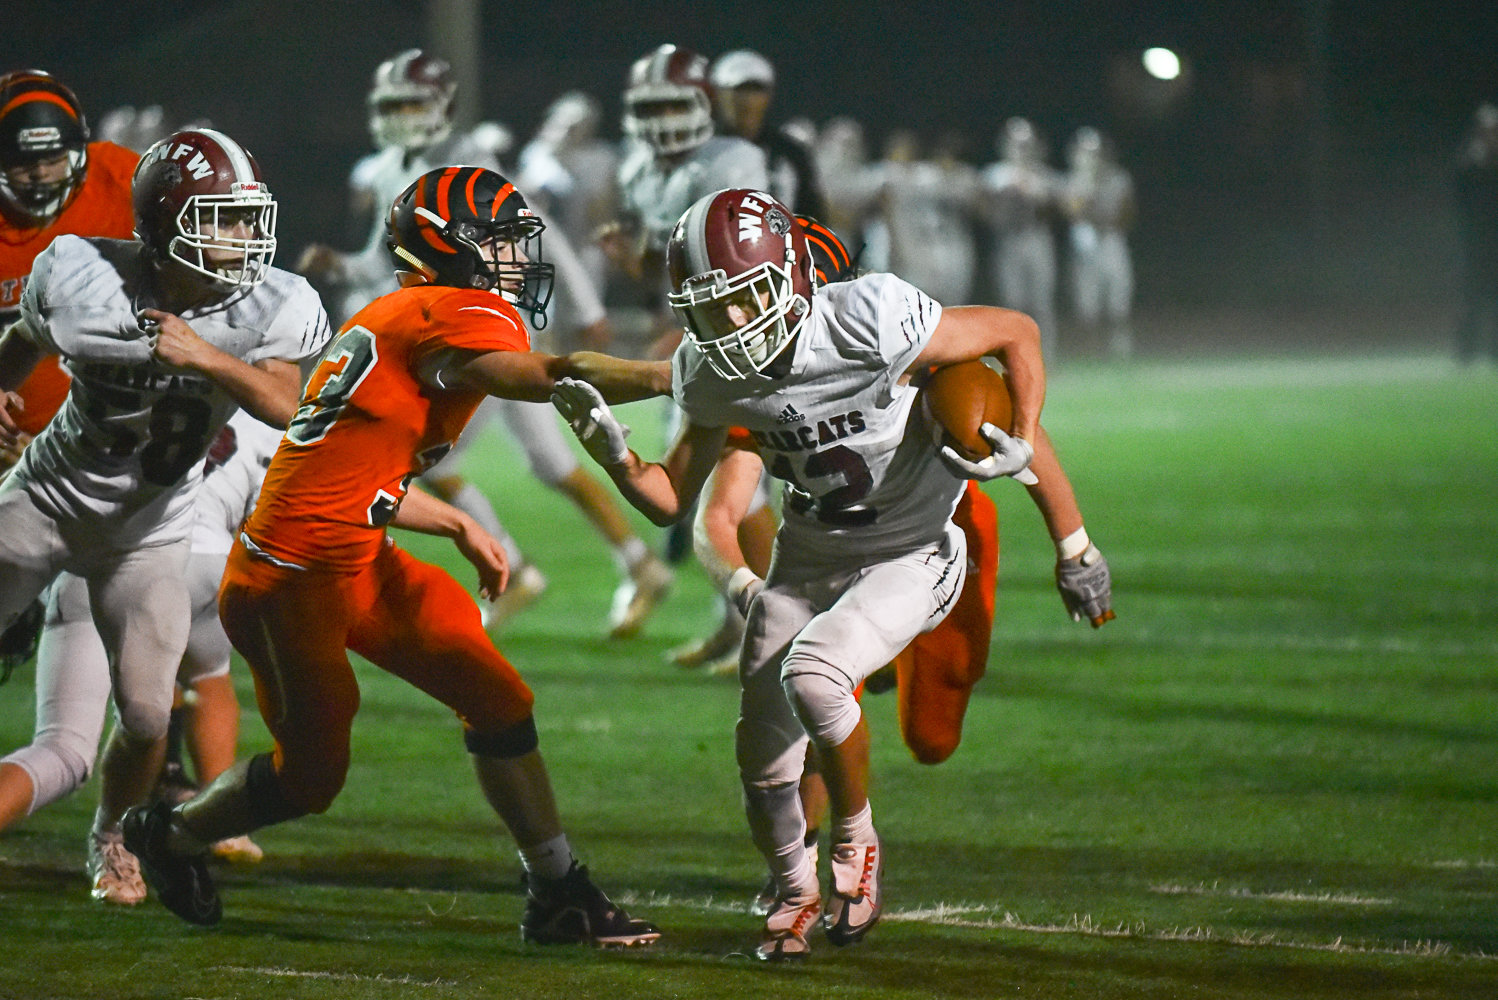 W.F. West's Beau Guyette runs in a third-quarter touchdown during the Bearcats' 55-7 win over Centralia on Oct. 28.